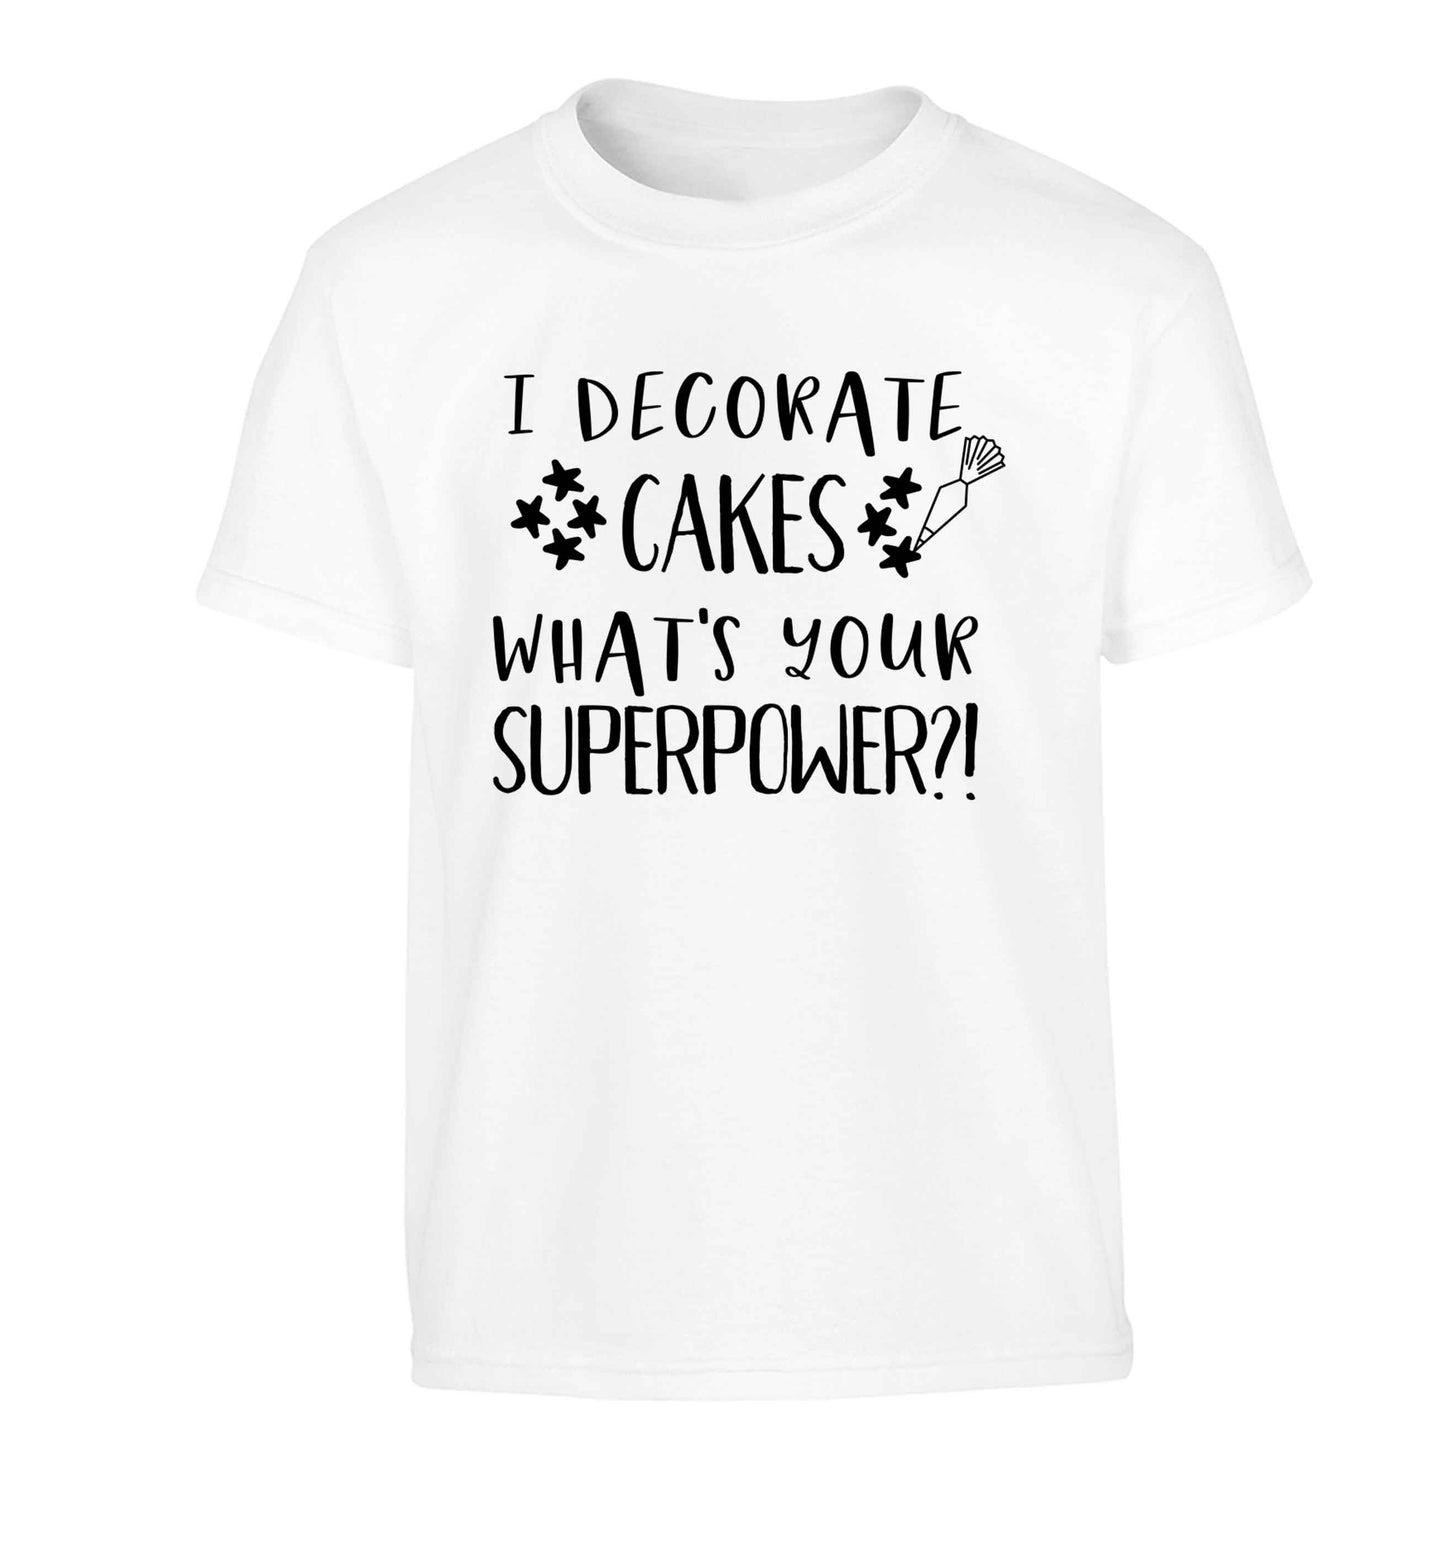 I decorate cakes what's your superpower?! Children's white Tshirt 12-13 Years